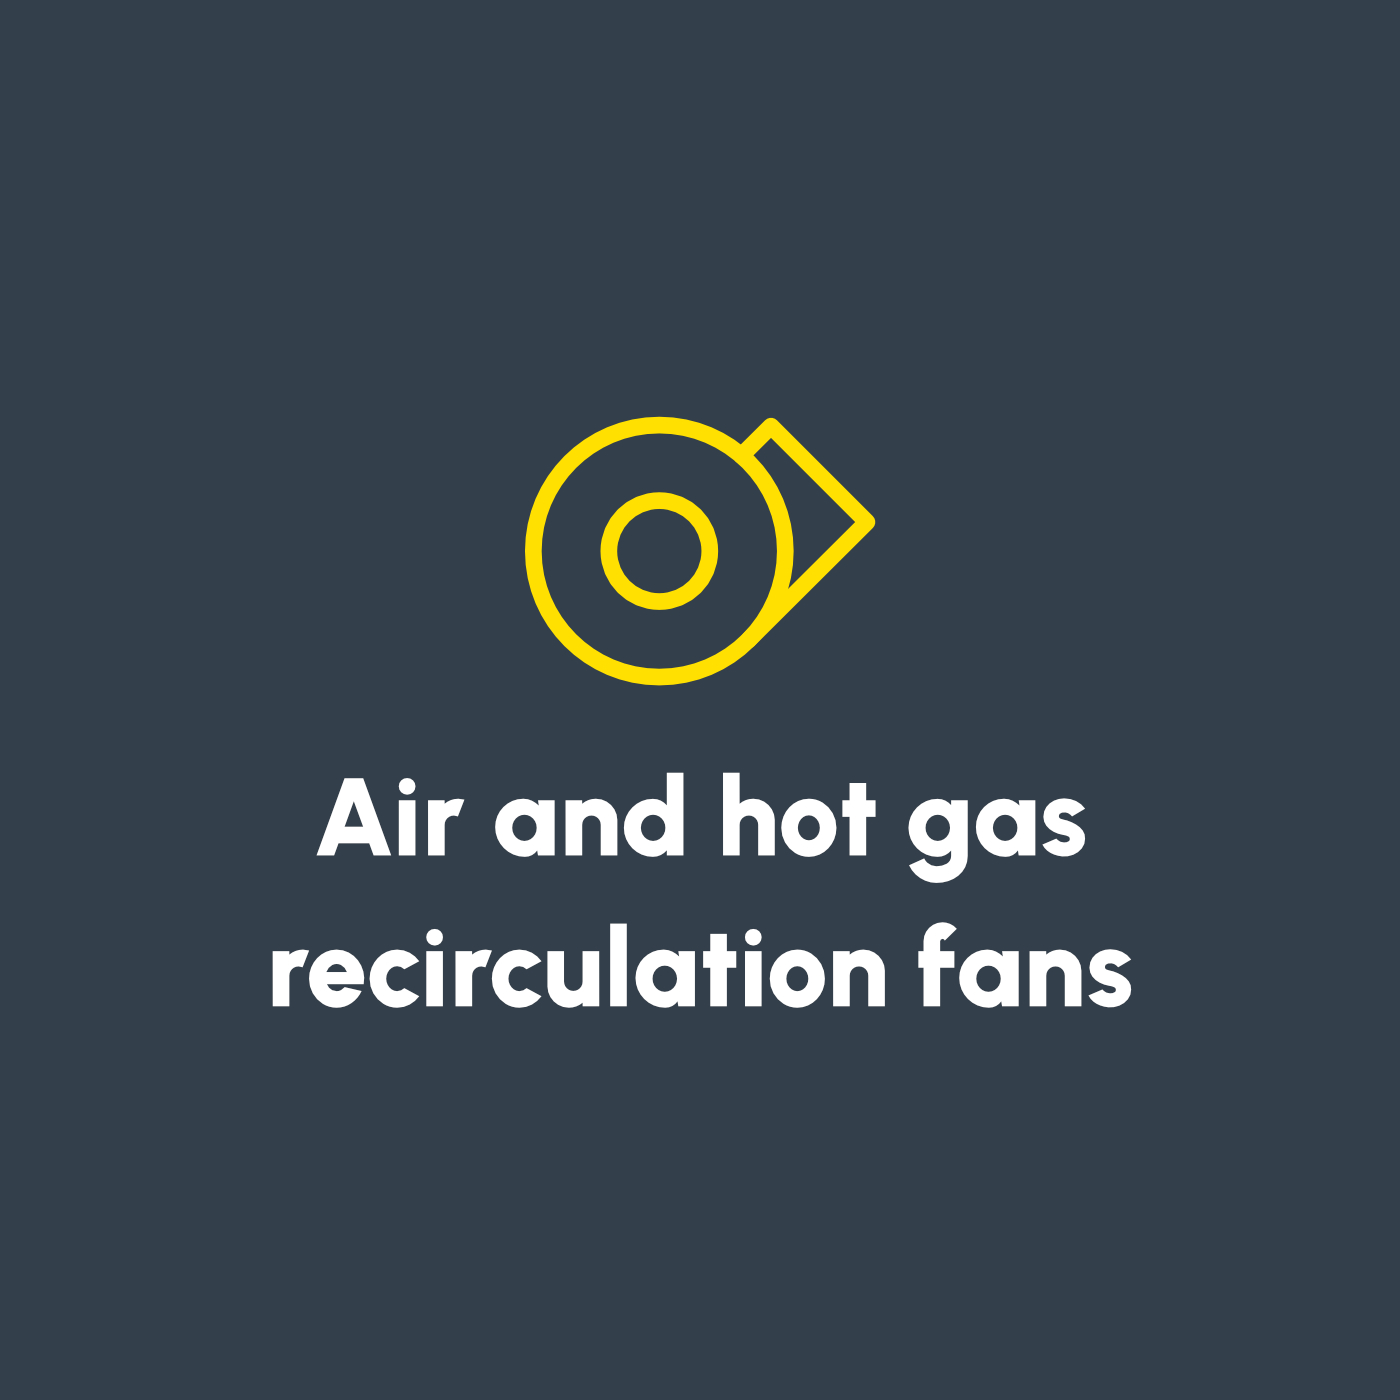 Air and hot gas recirculation fans